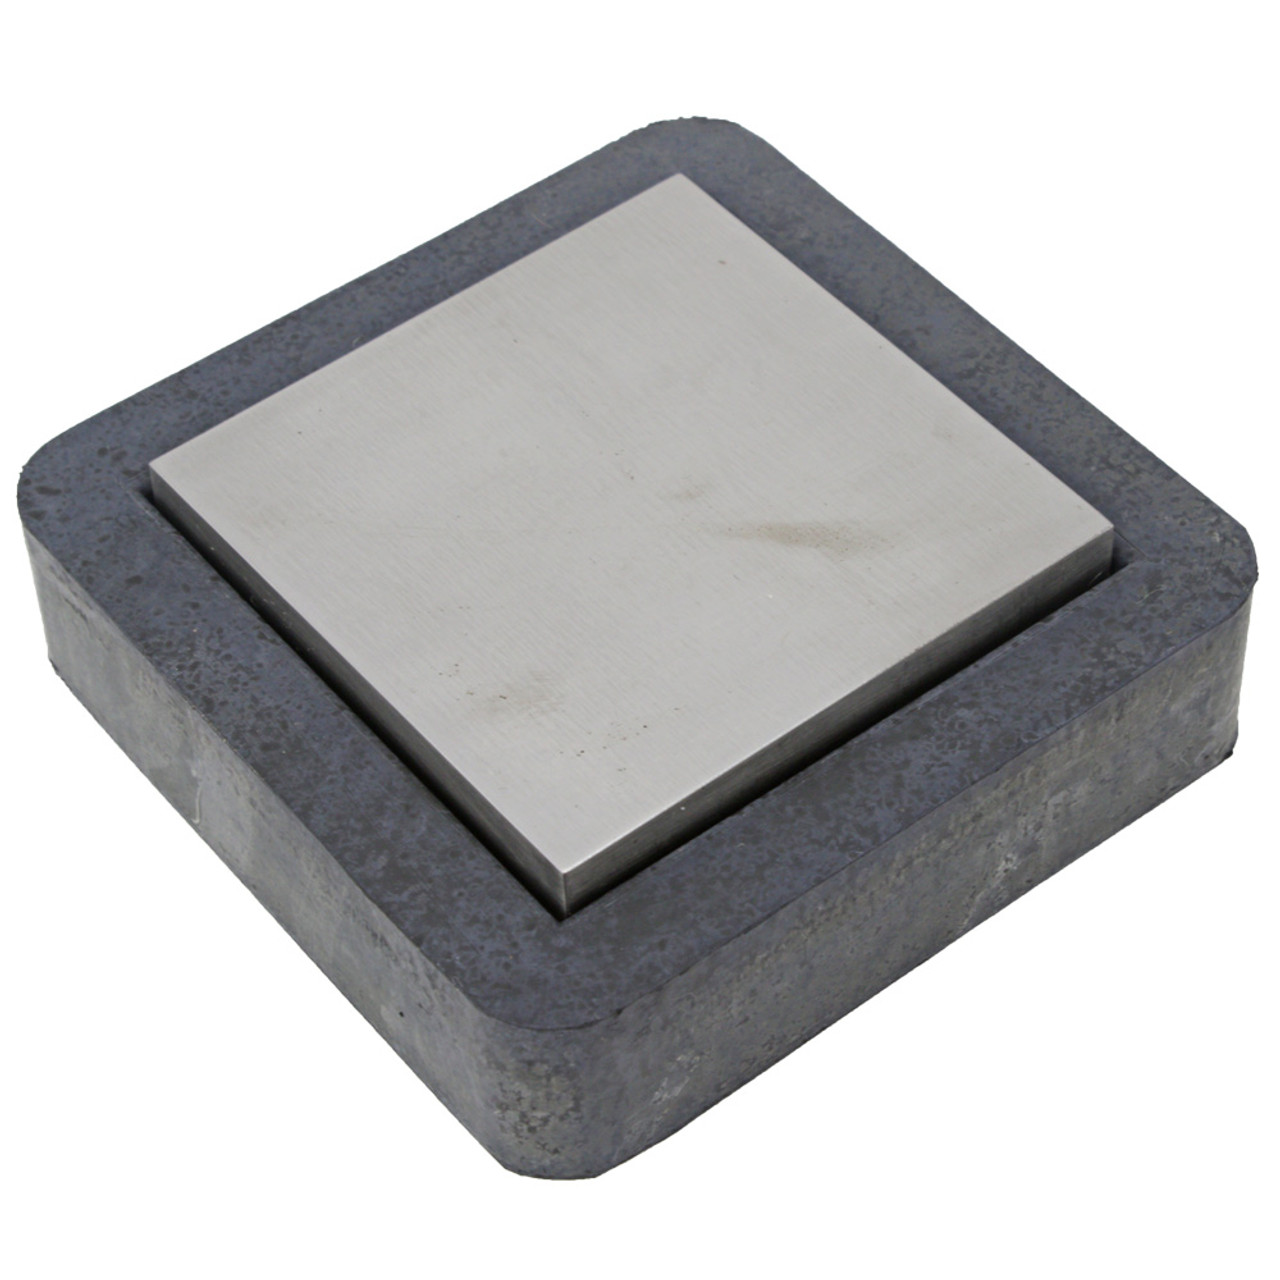 Rubber and Steel Bench Block 3 Inch Square